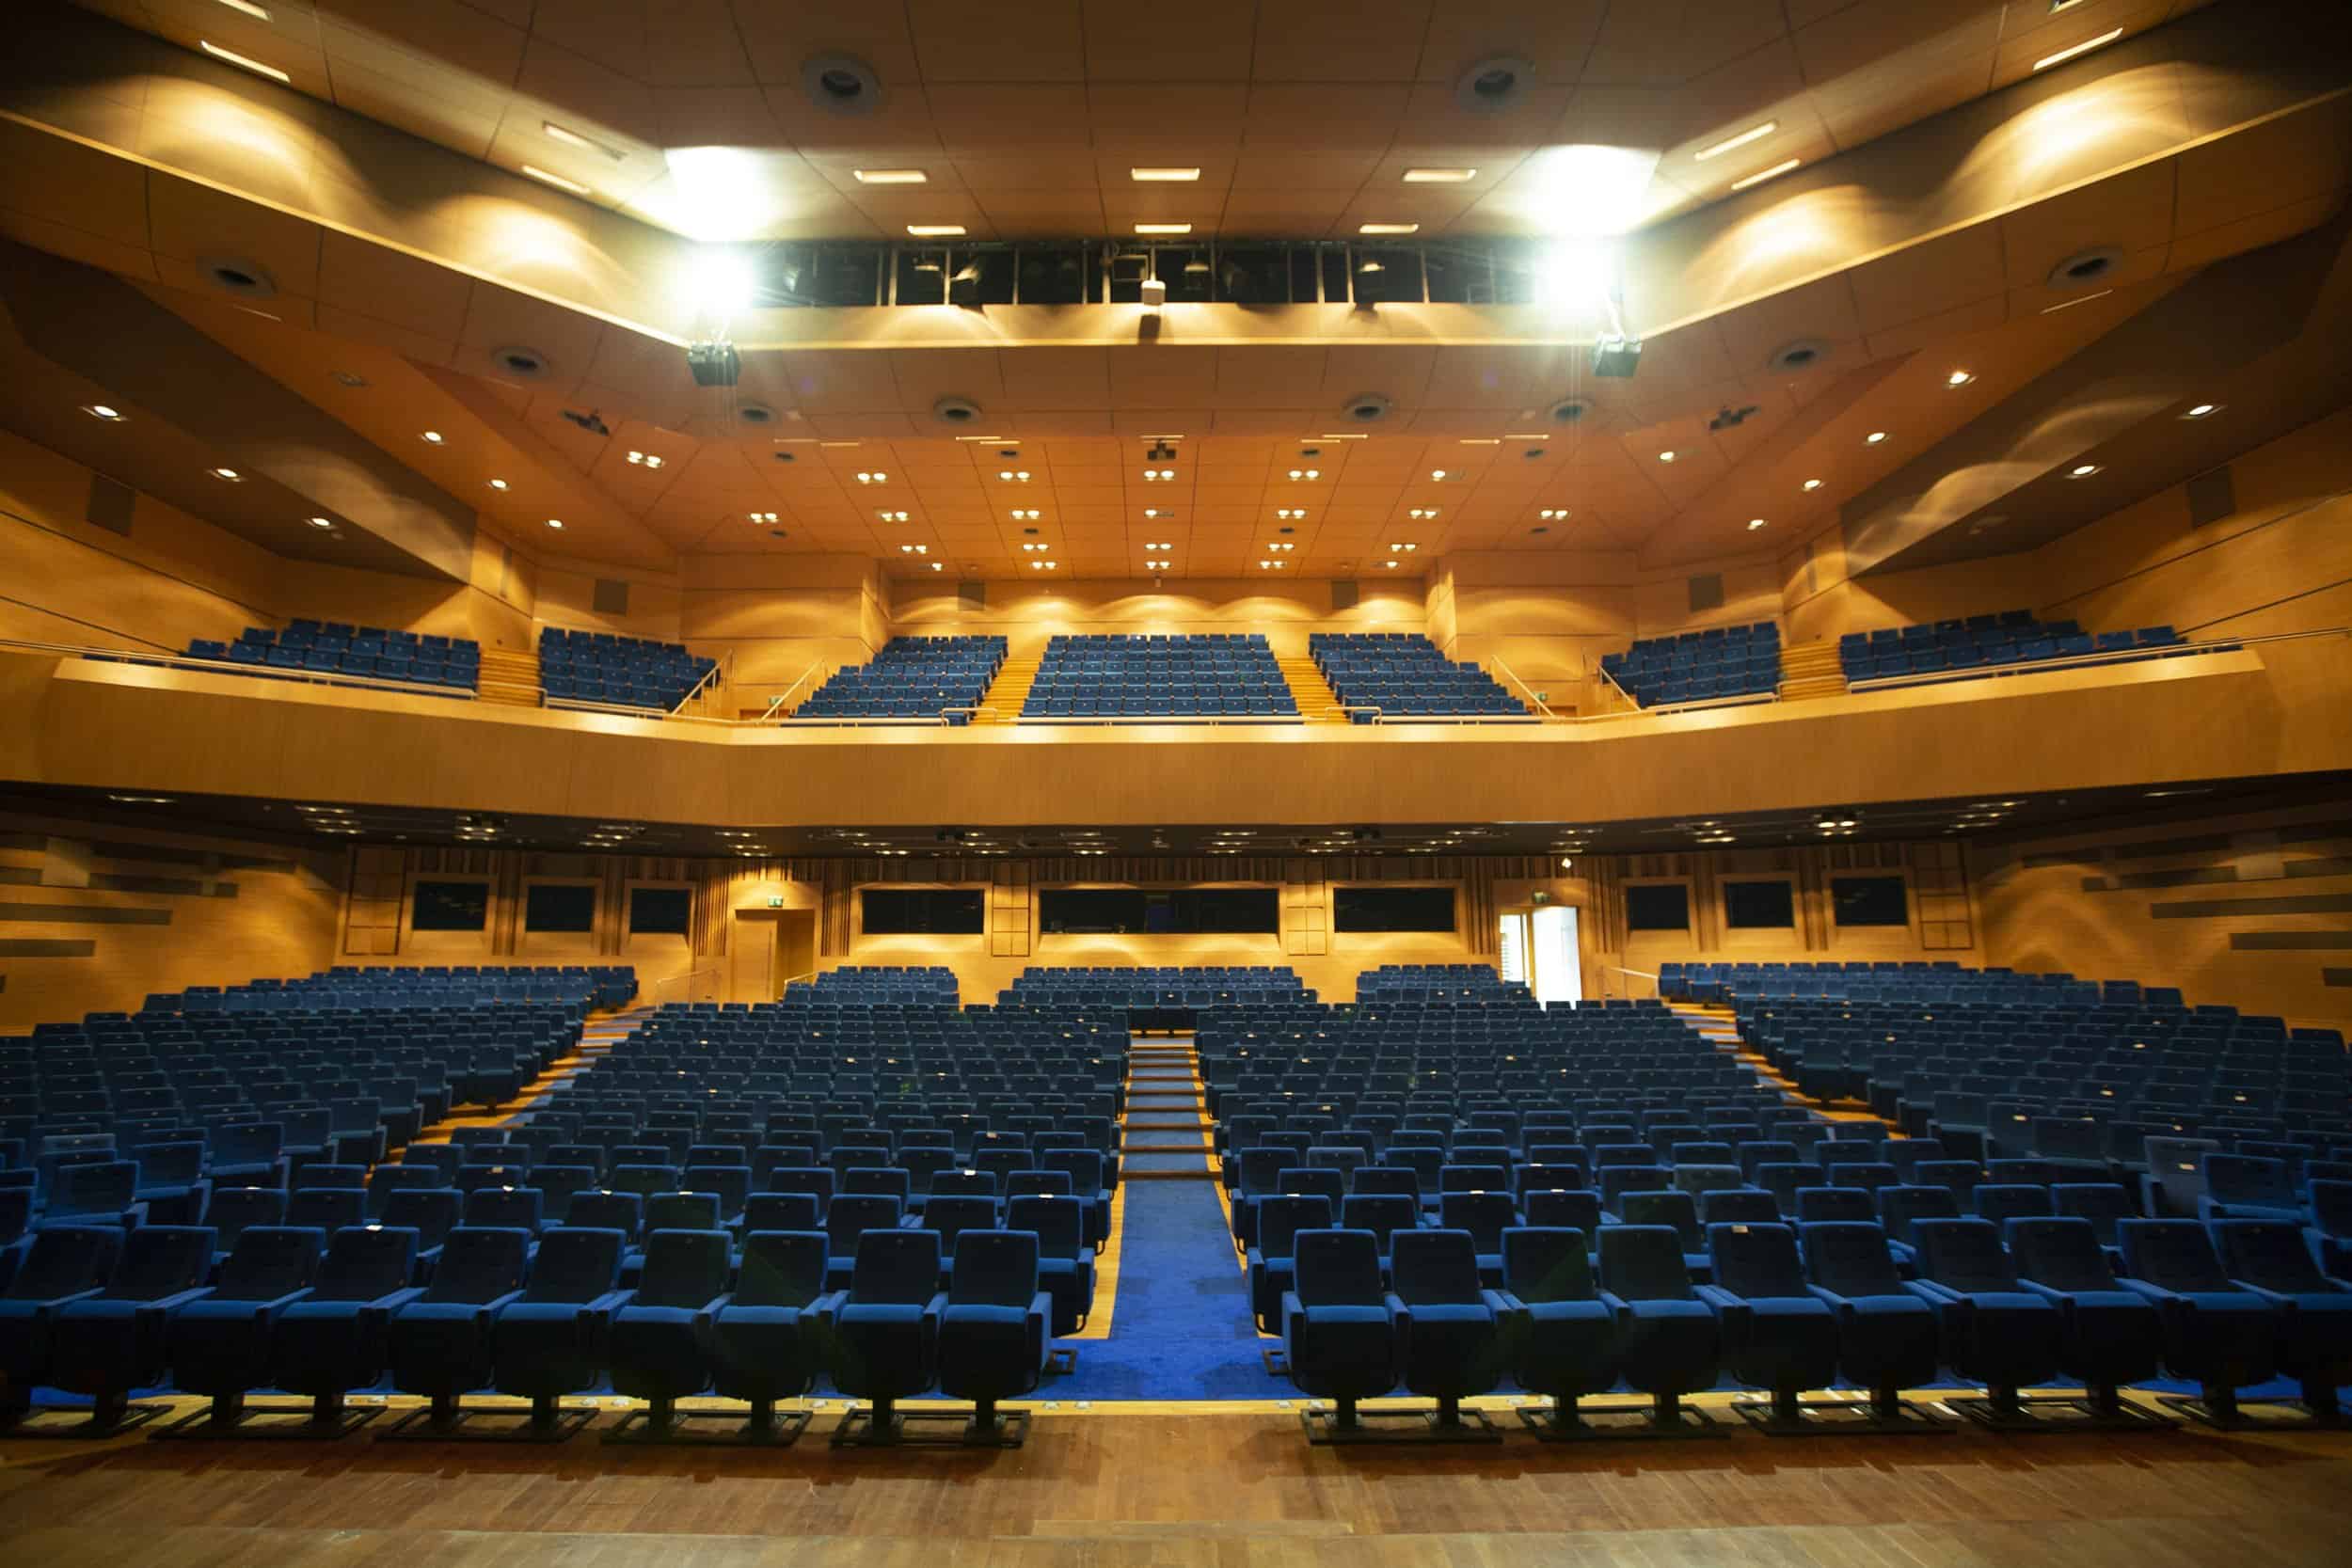 Deluxe auditorium with an upscale ambience